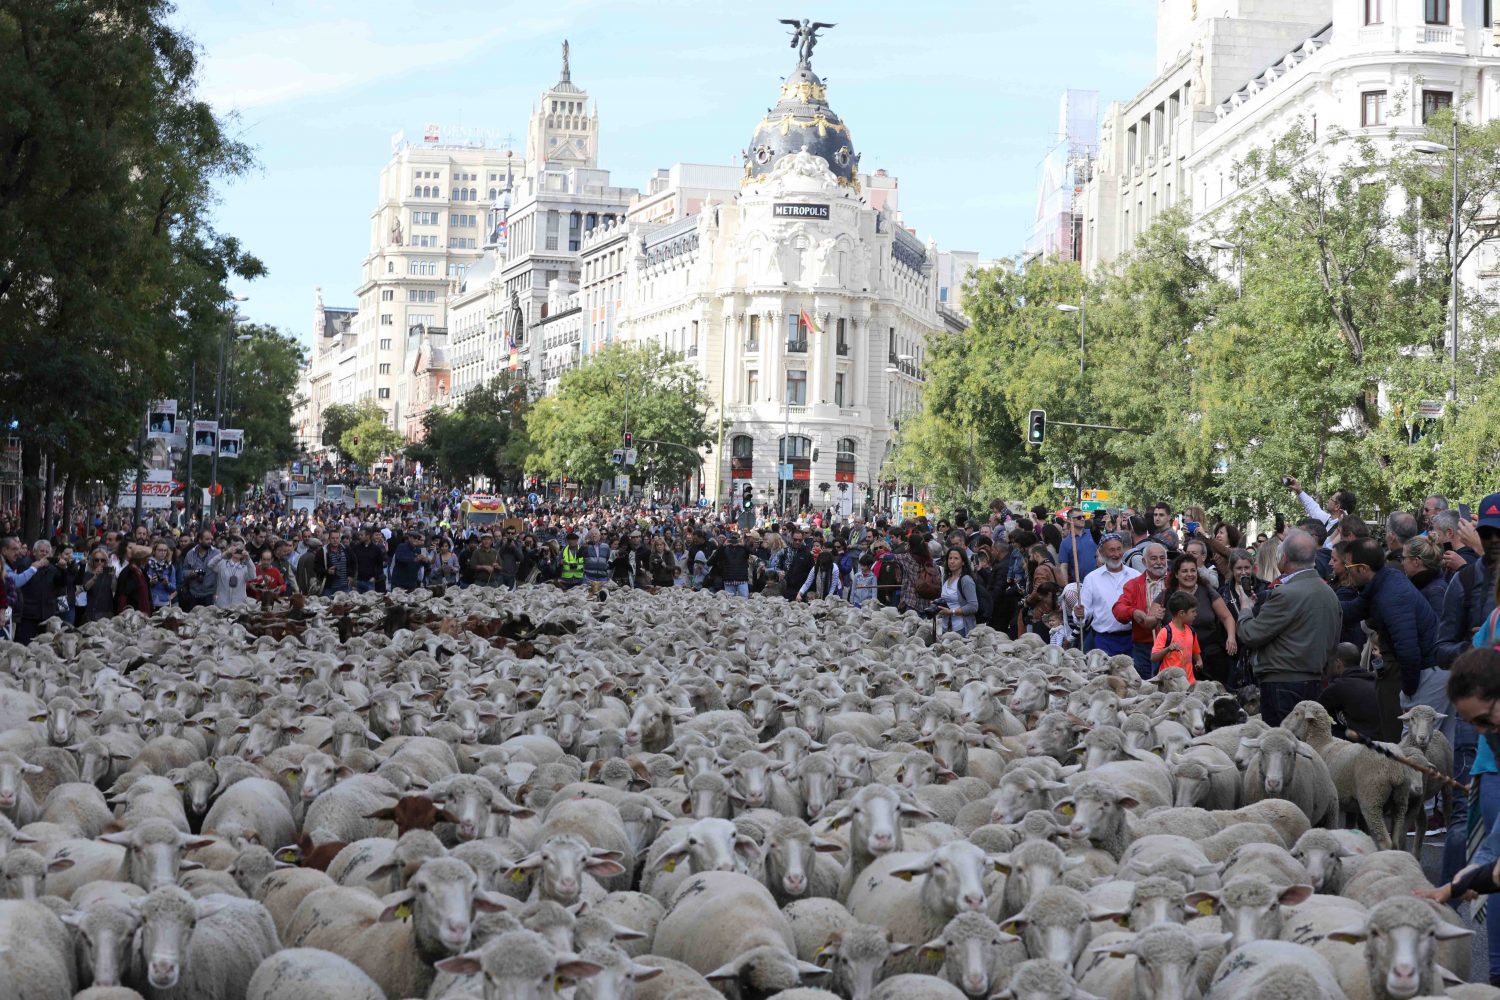 A group of sheep at Diaria de Madrid (Creative Commons)